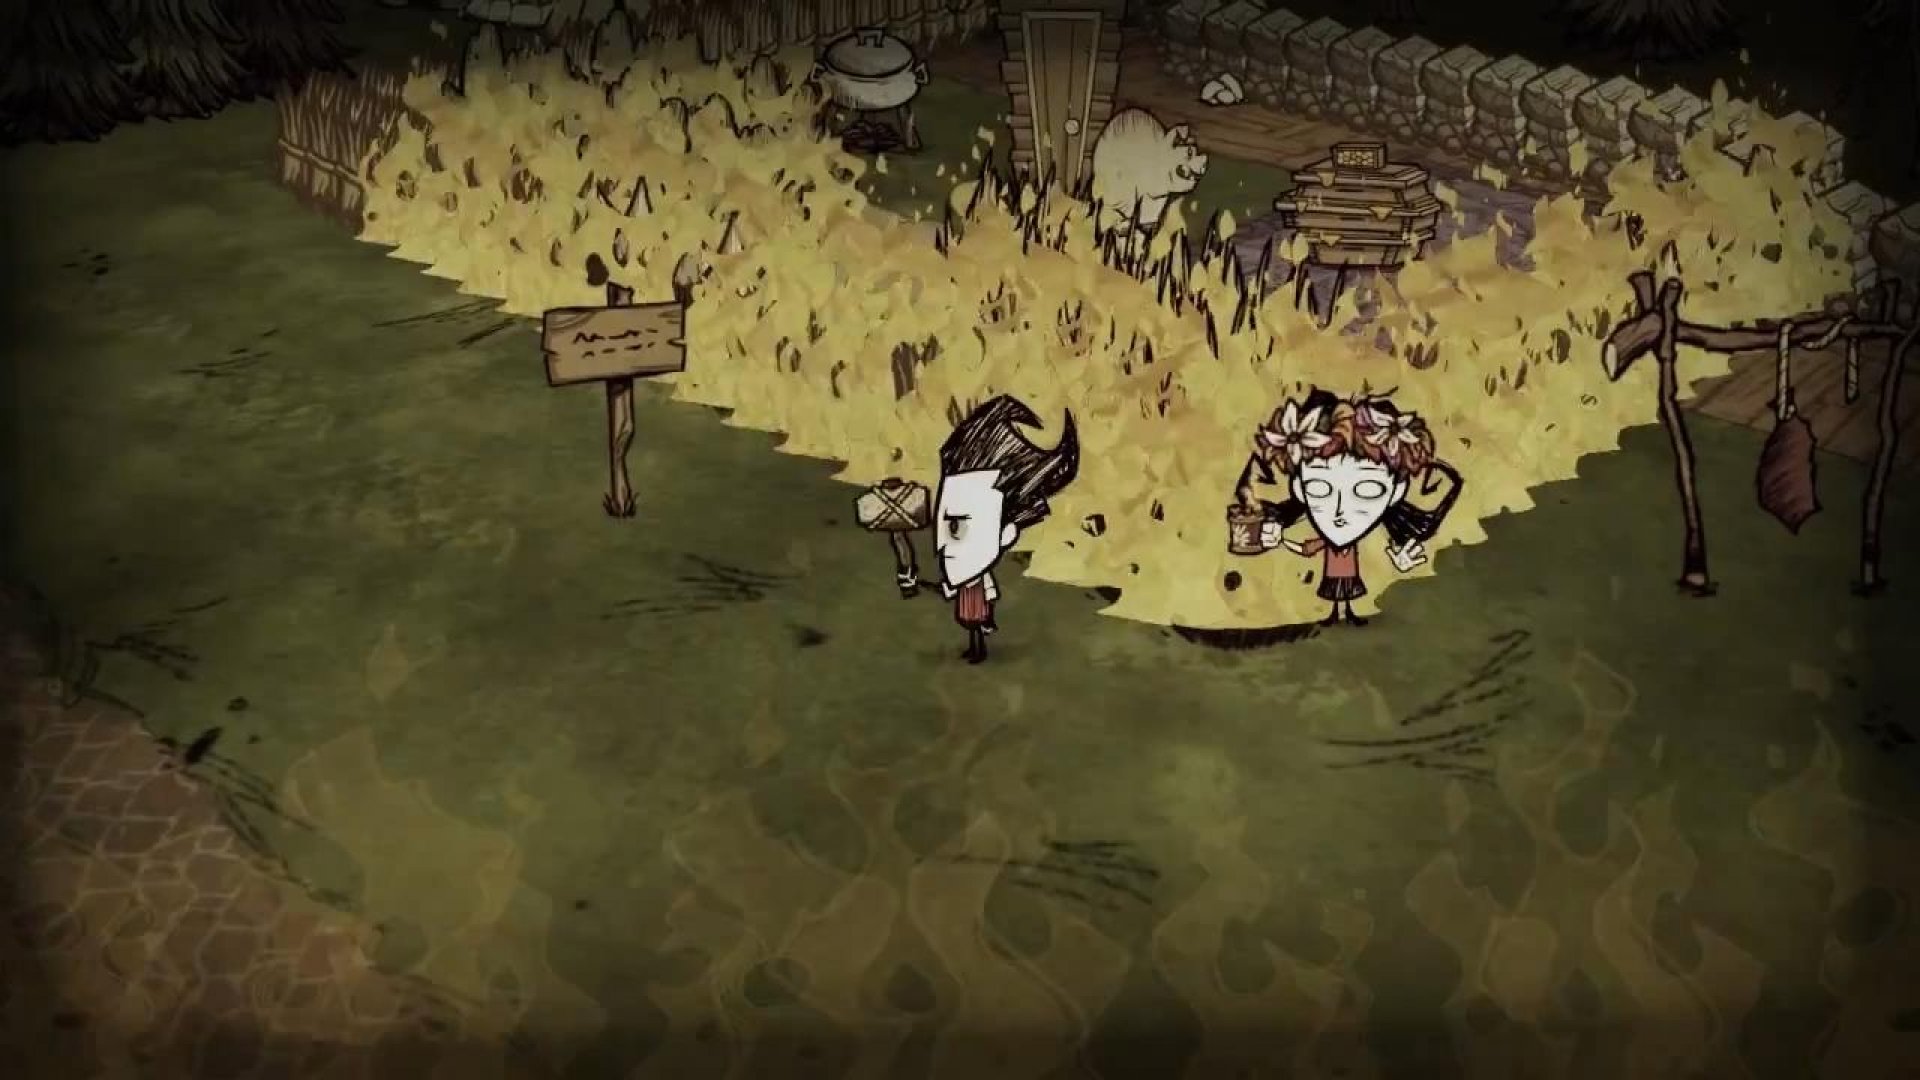 Don t starve together six update. Don't Starve together. Don t Starve игра. Донт старв тугезер. Don't Starve джунгли.